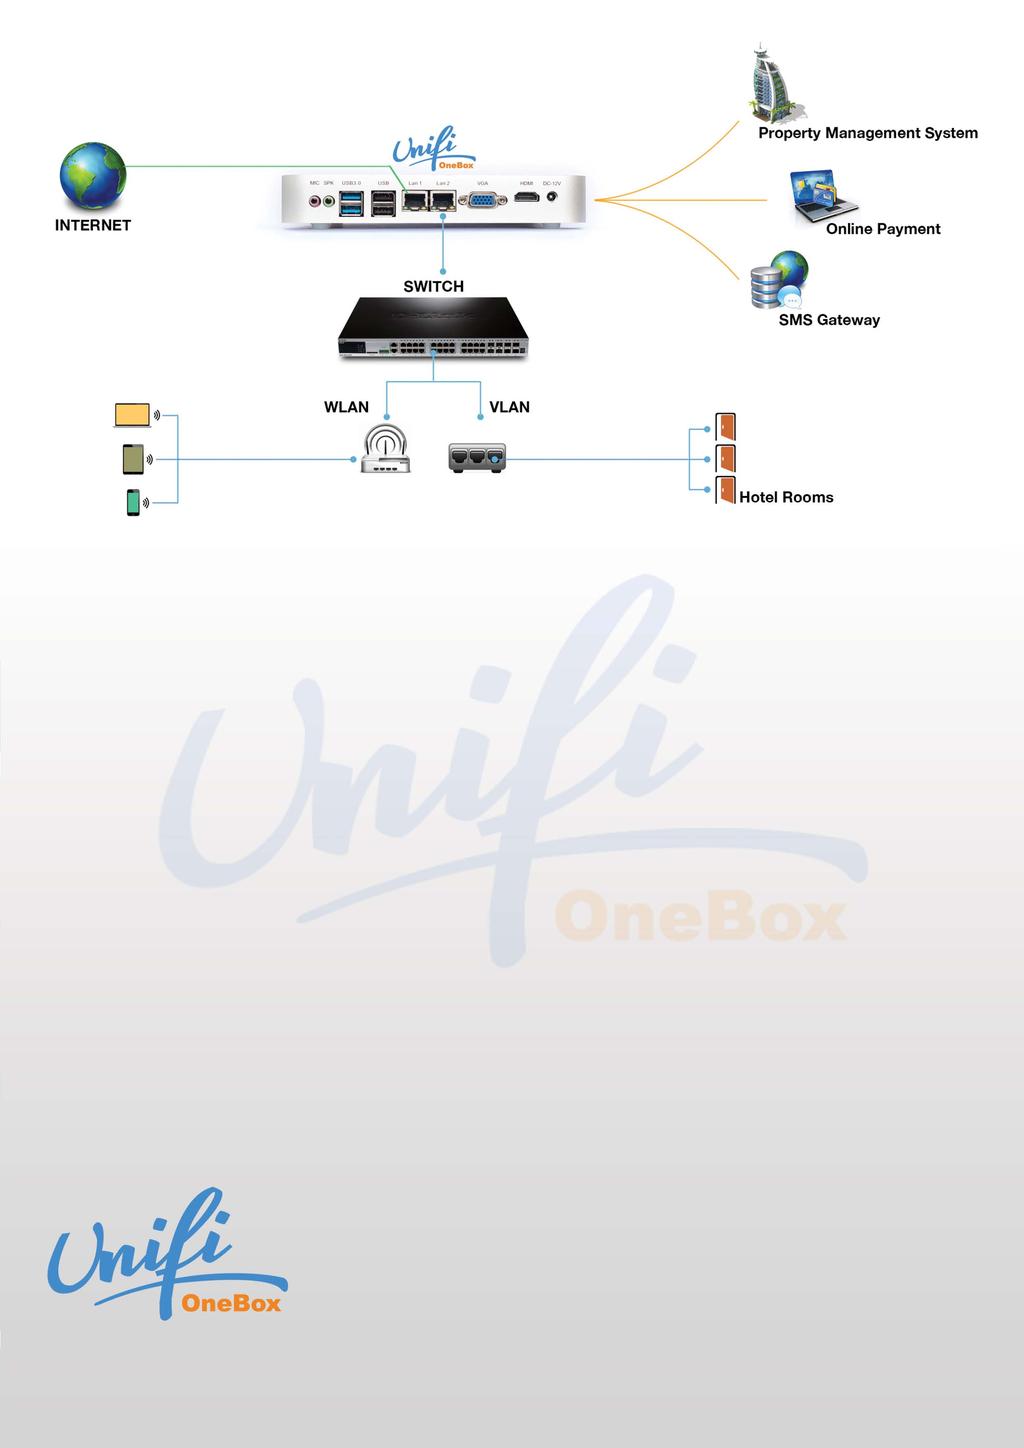 Unifi OneBox Architecture Pricing Pricing is available with minimum increments of 25 concurrent user (CU) licenses.